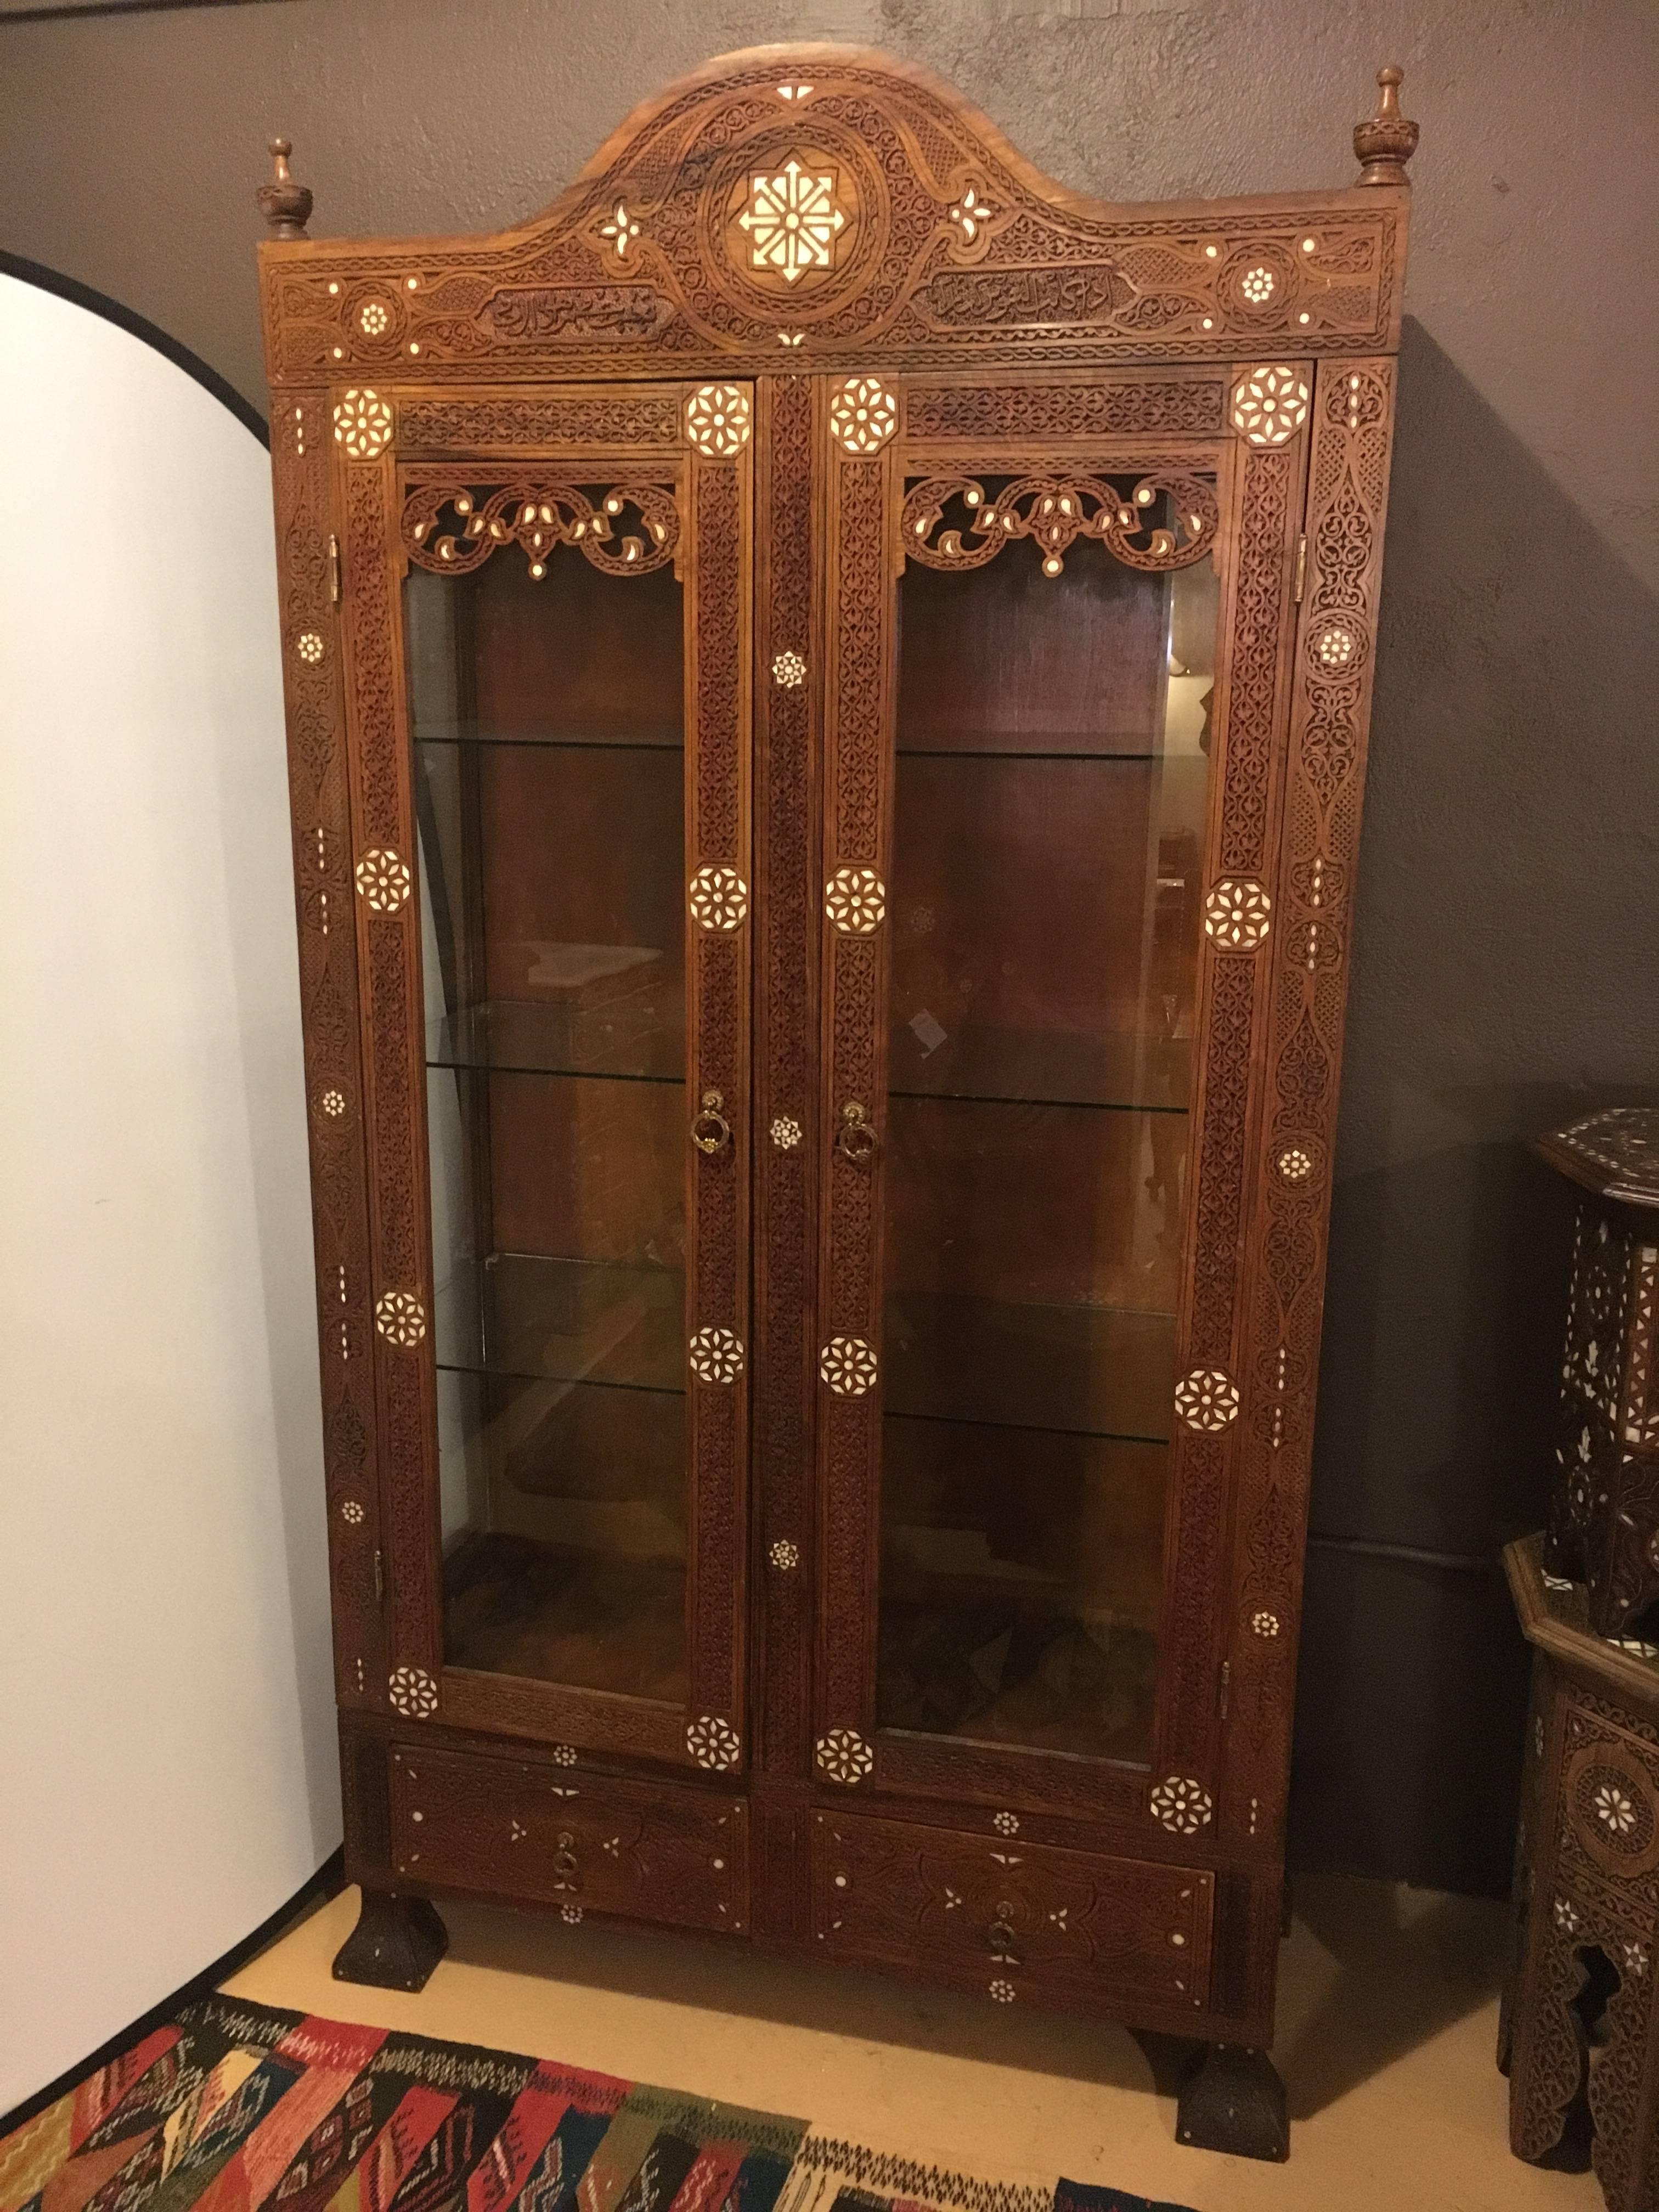 Antique Syrian cabinet hand-carved with mother-of-pearl inlays fine mid-19th century design. The bracket feet supporting a double glass door pair of finely inlaid mother-of-pearl doors with drawer bottom beneath.

 